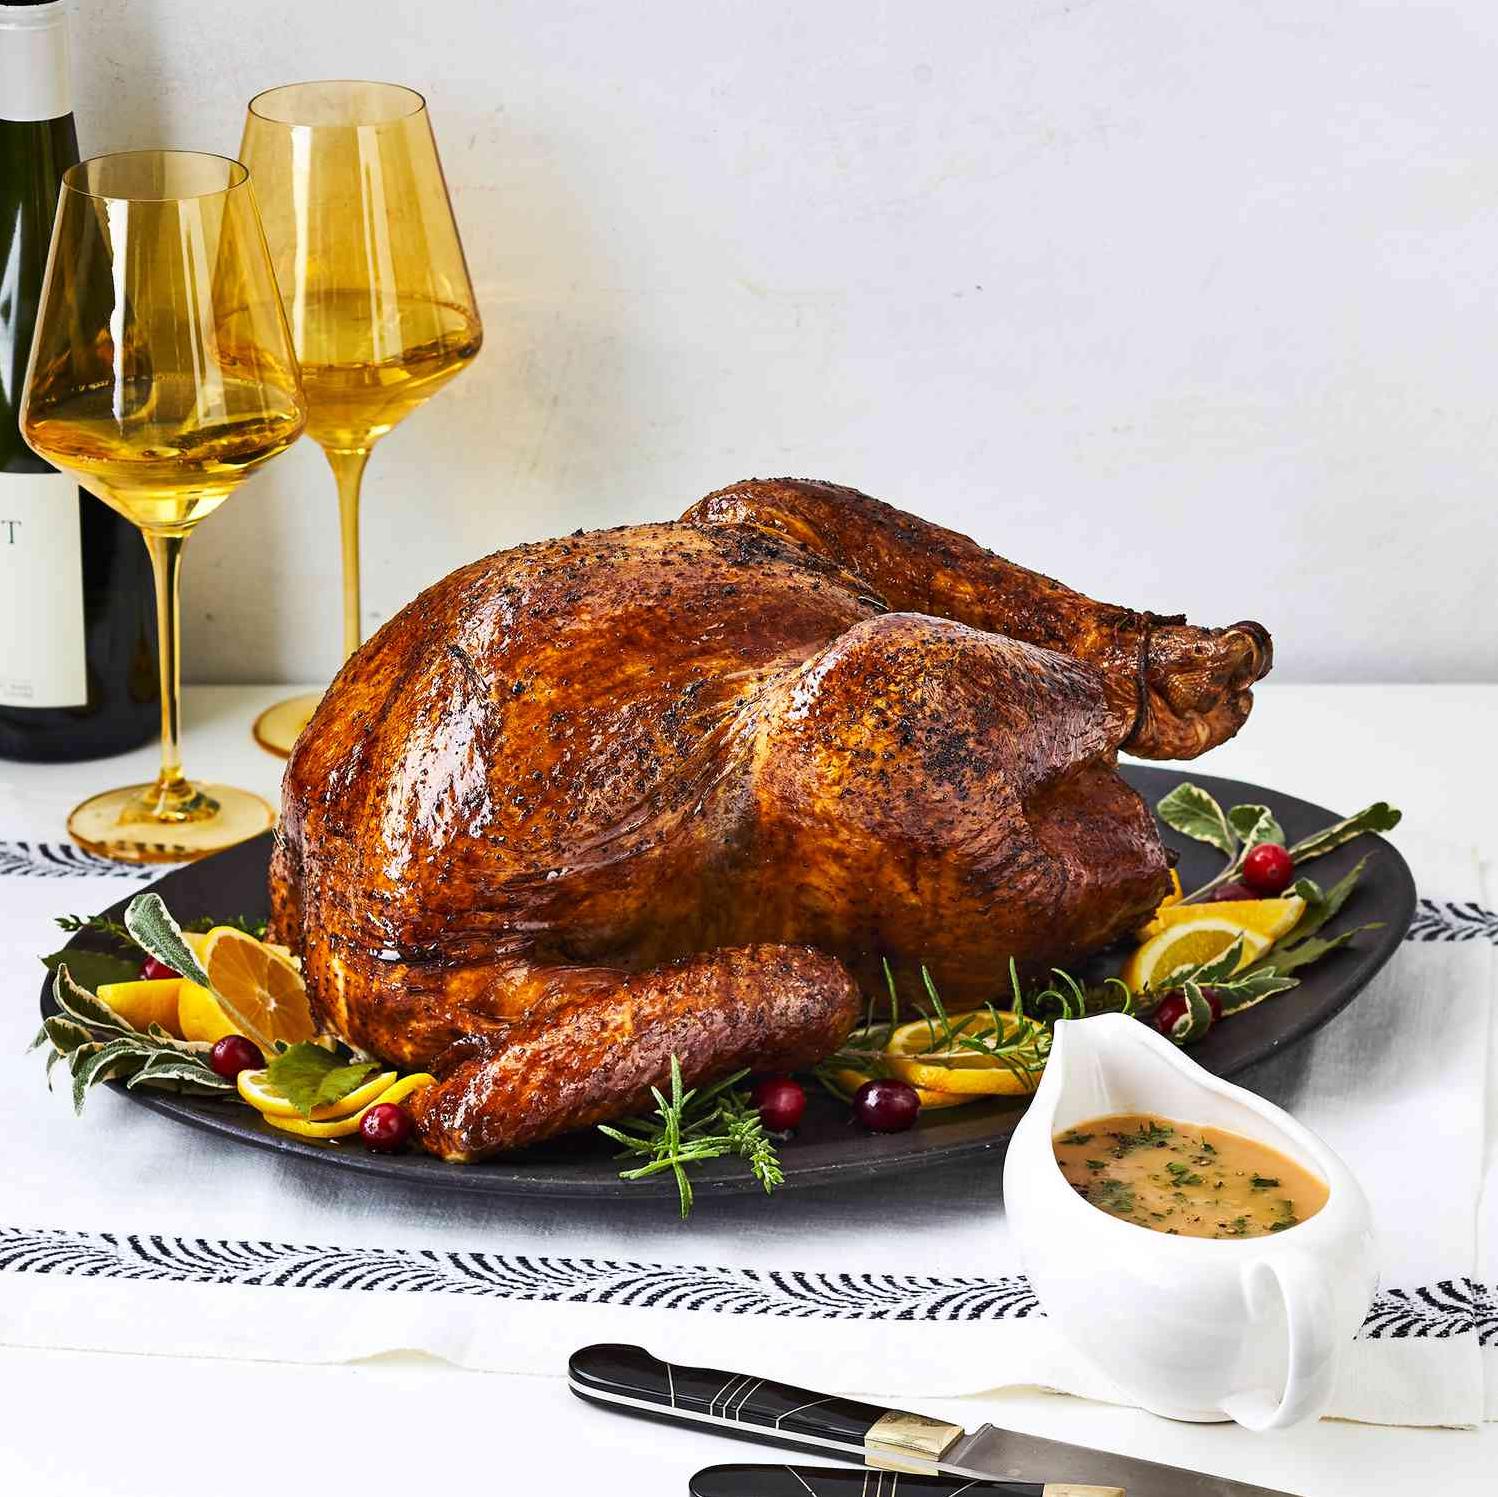  A delicious and impressive roast turkey with a decadent white wine gravy.